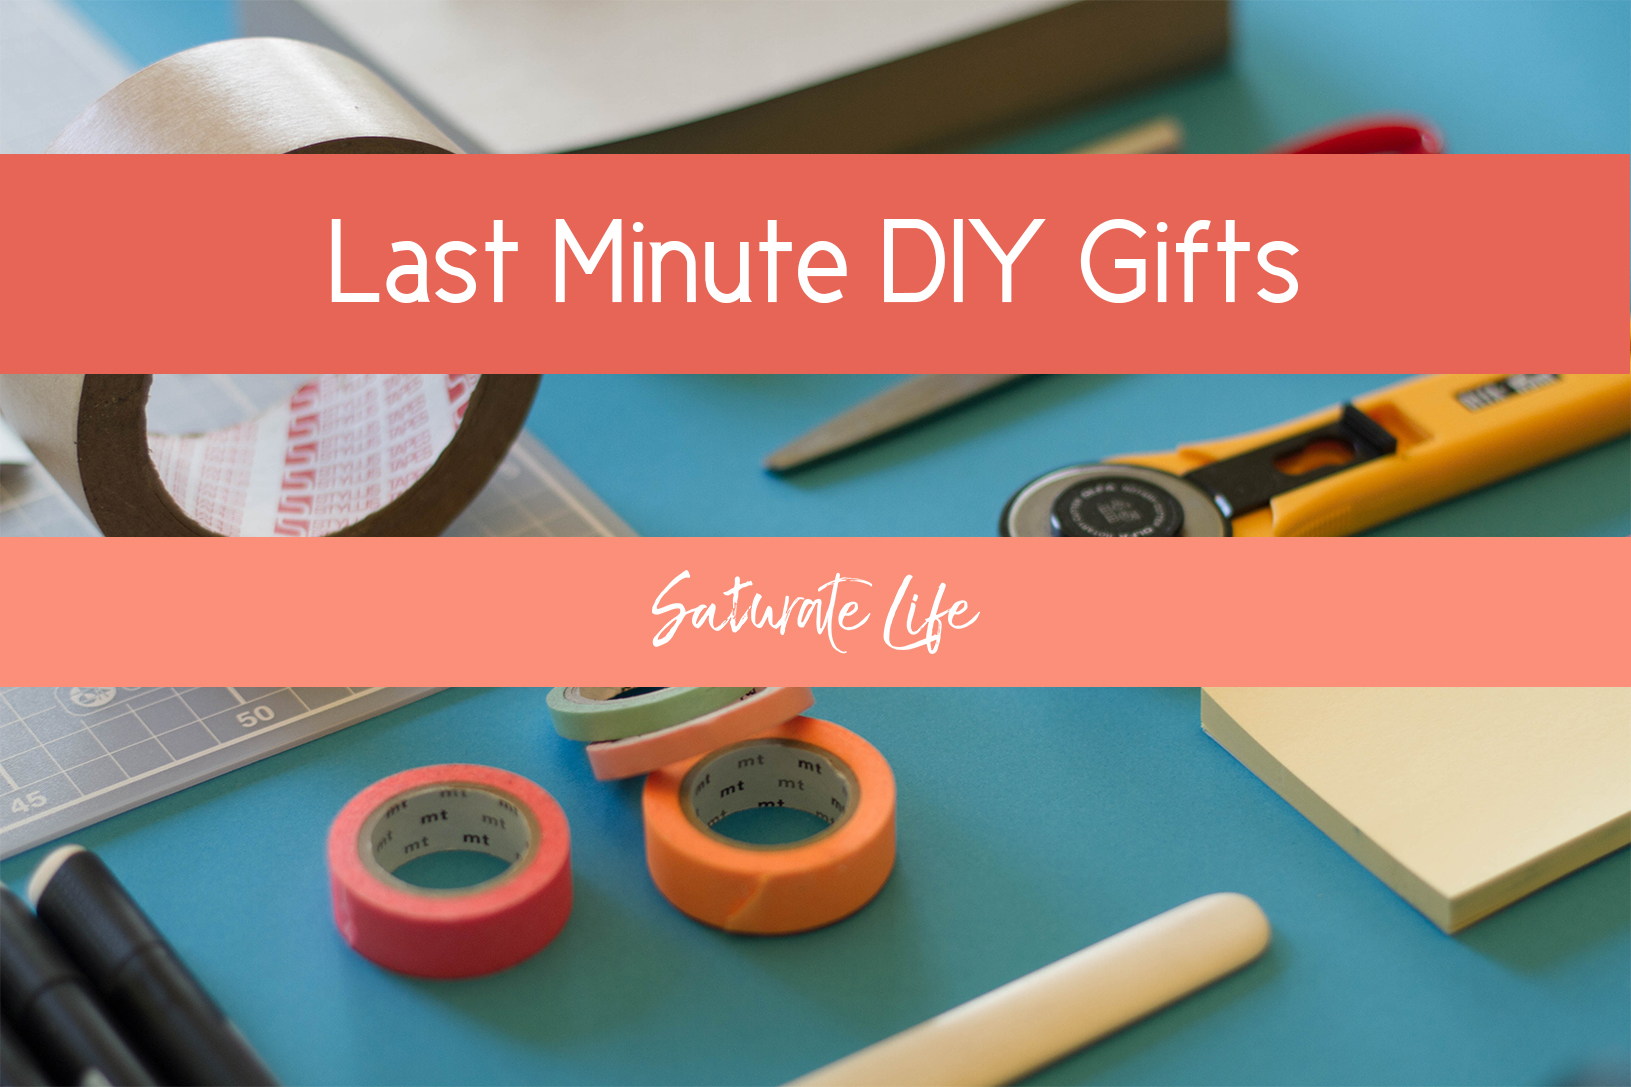 Last Minute DIY Christmas Gifts for Everyone